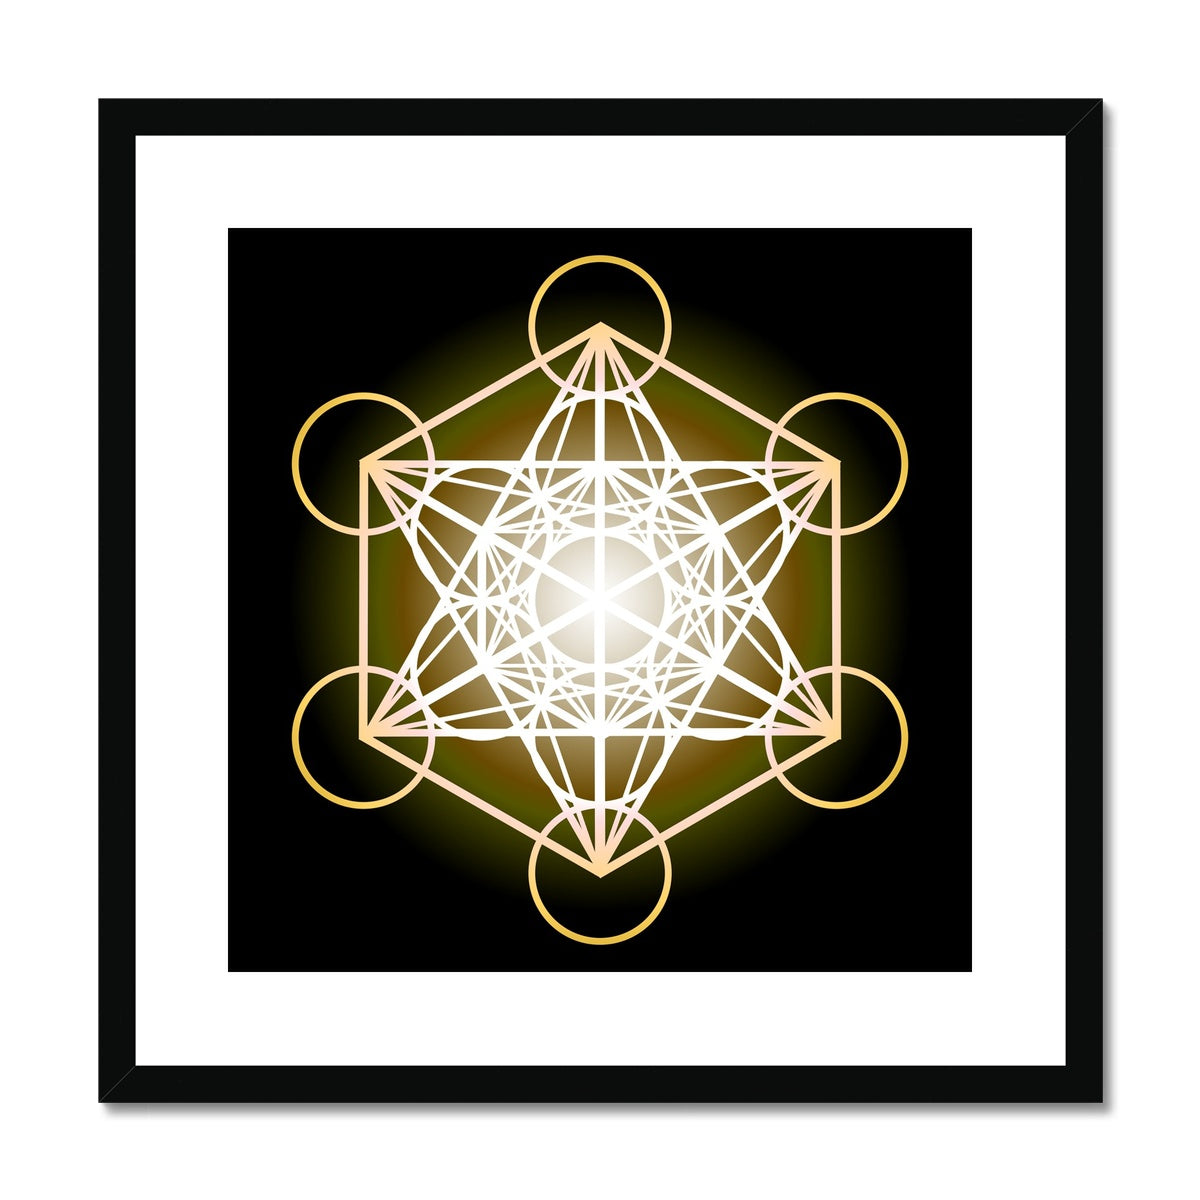 Metatrons Cube in Gold Framed & Mounted Print